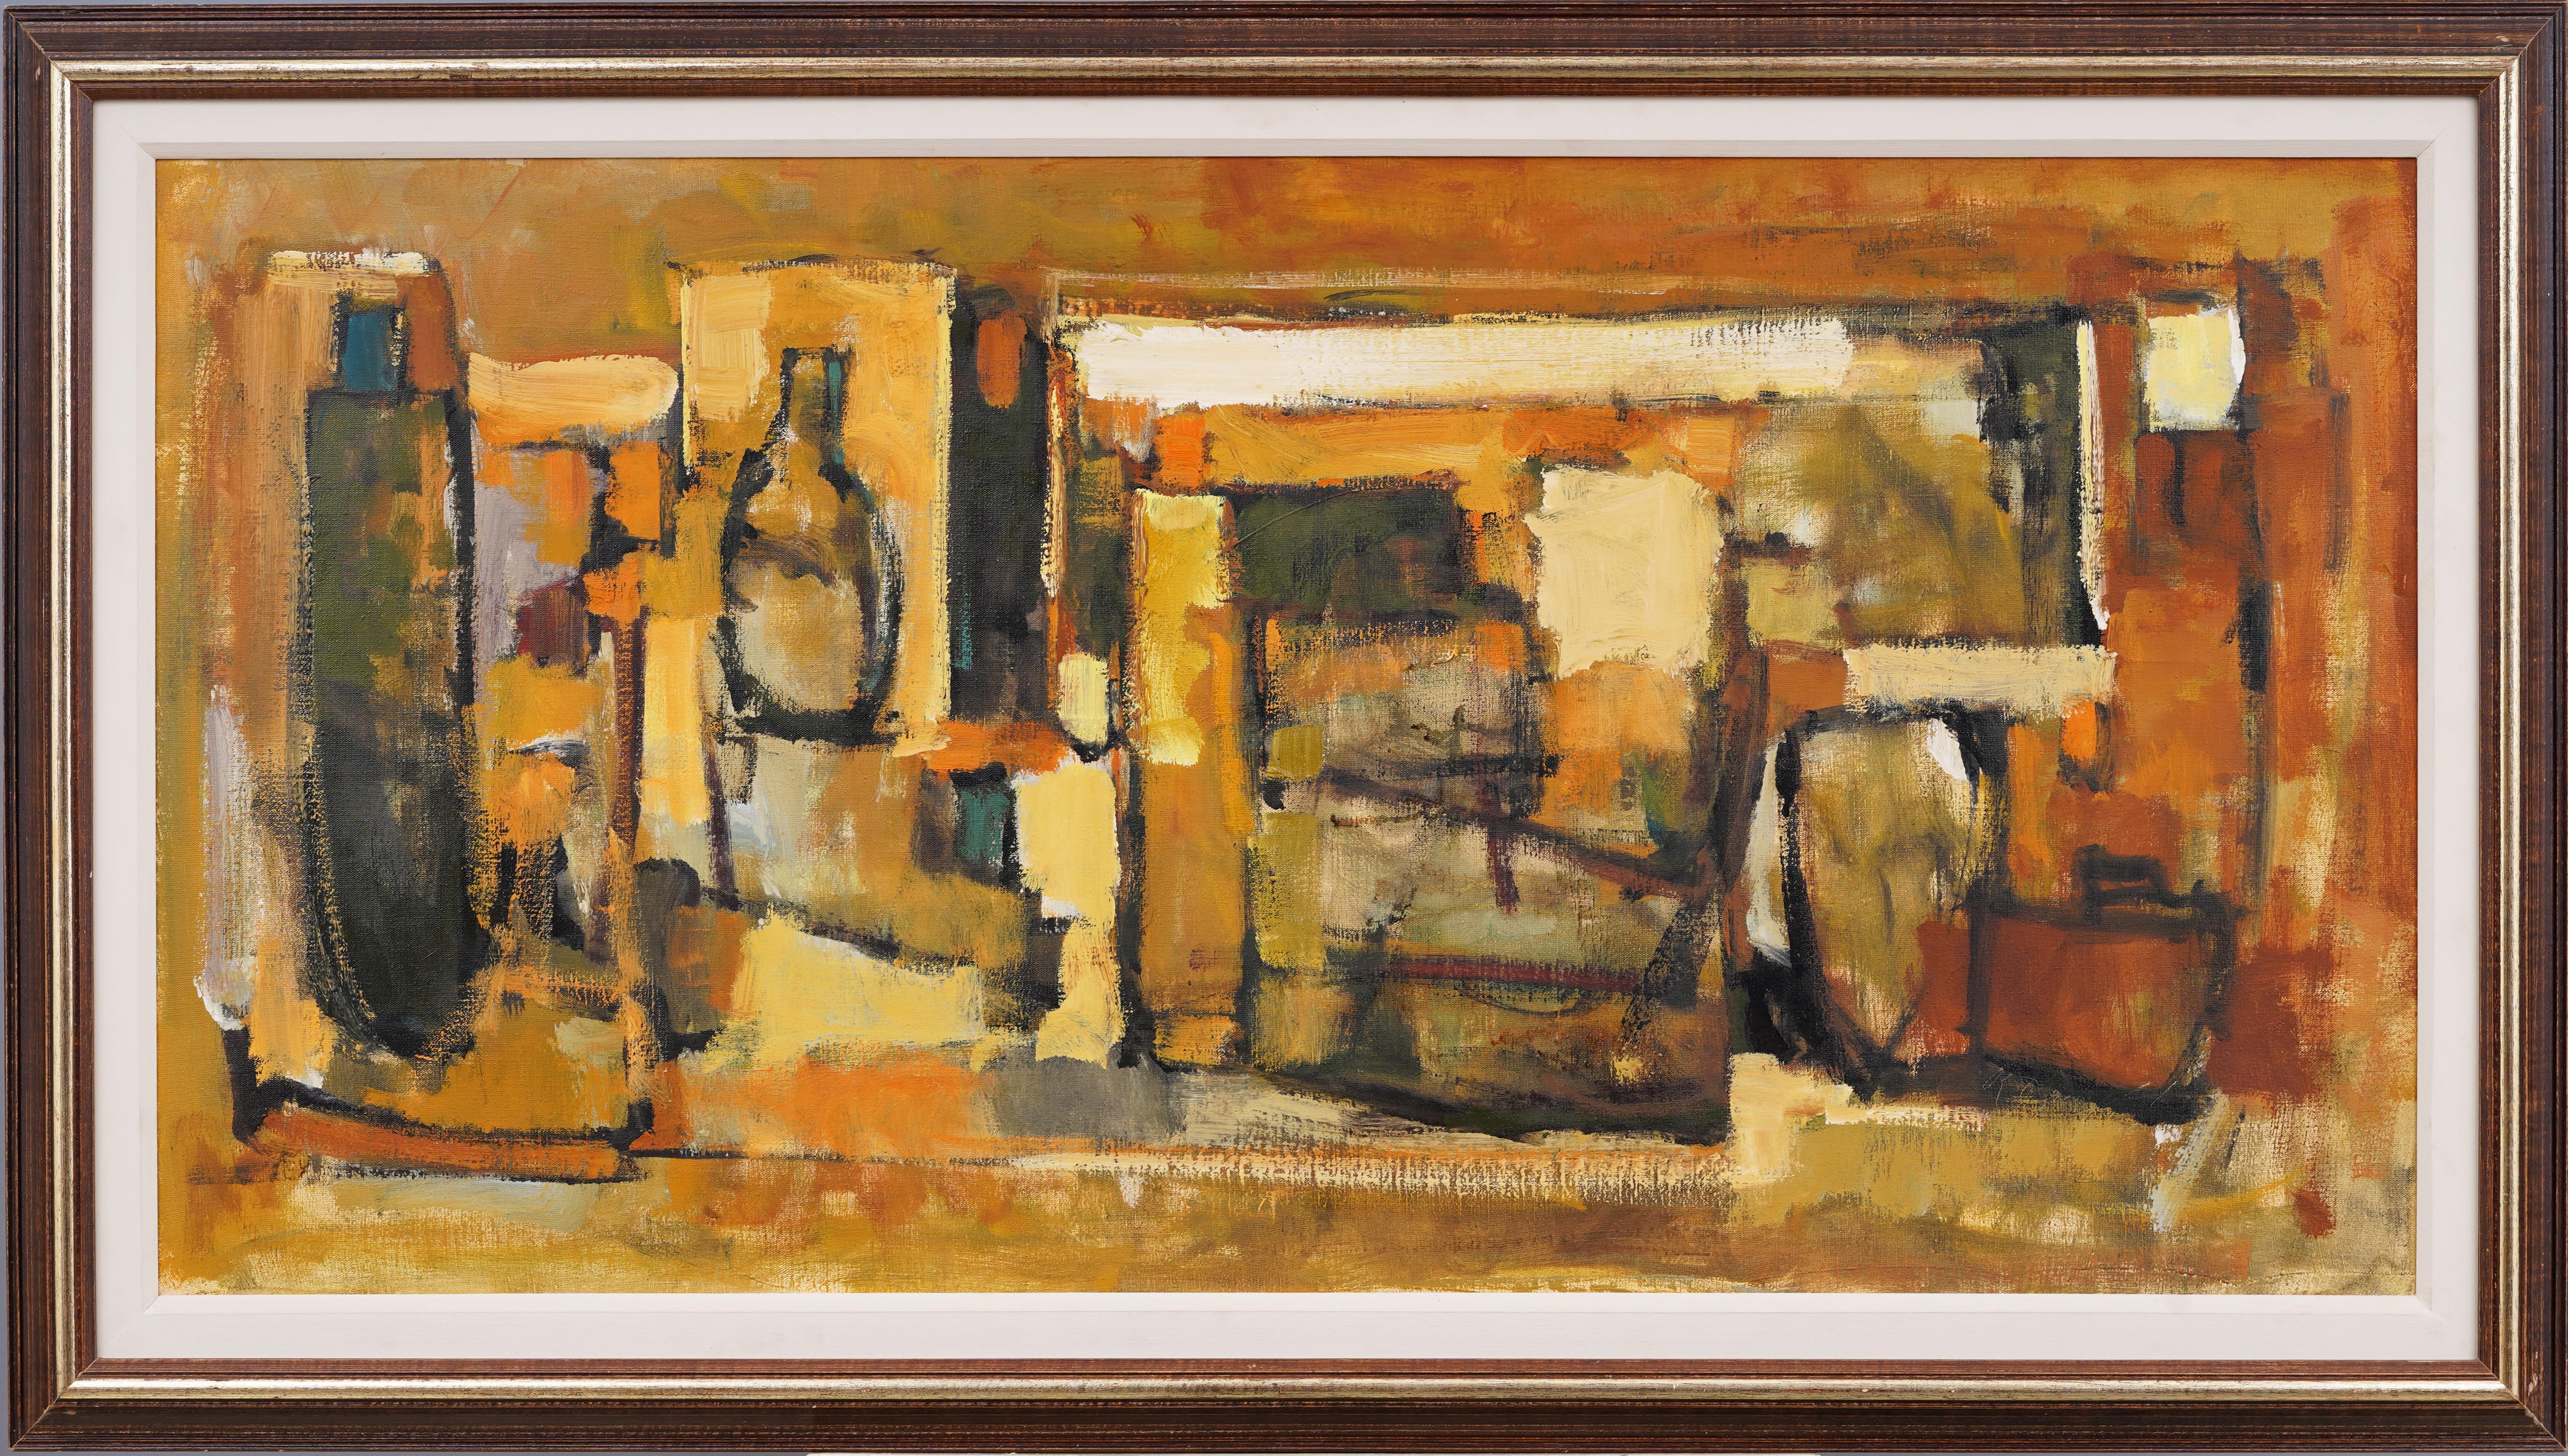 Very impressive mid 20th century cubist abstract.  Oil on canvas.  Framed.  